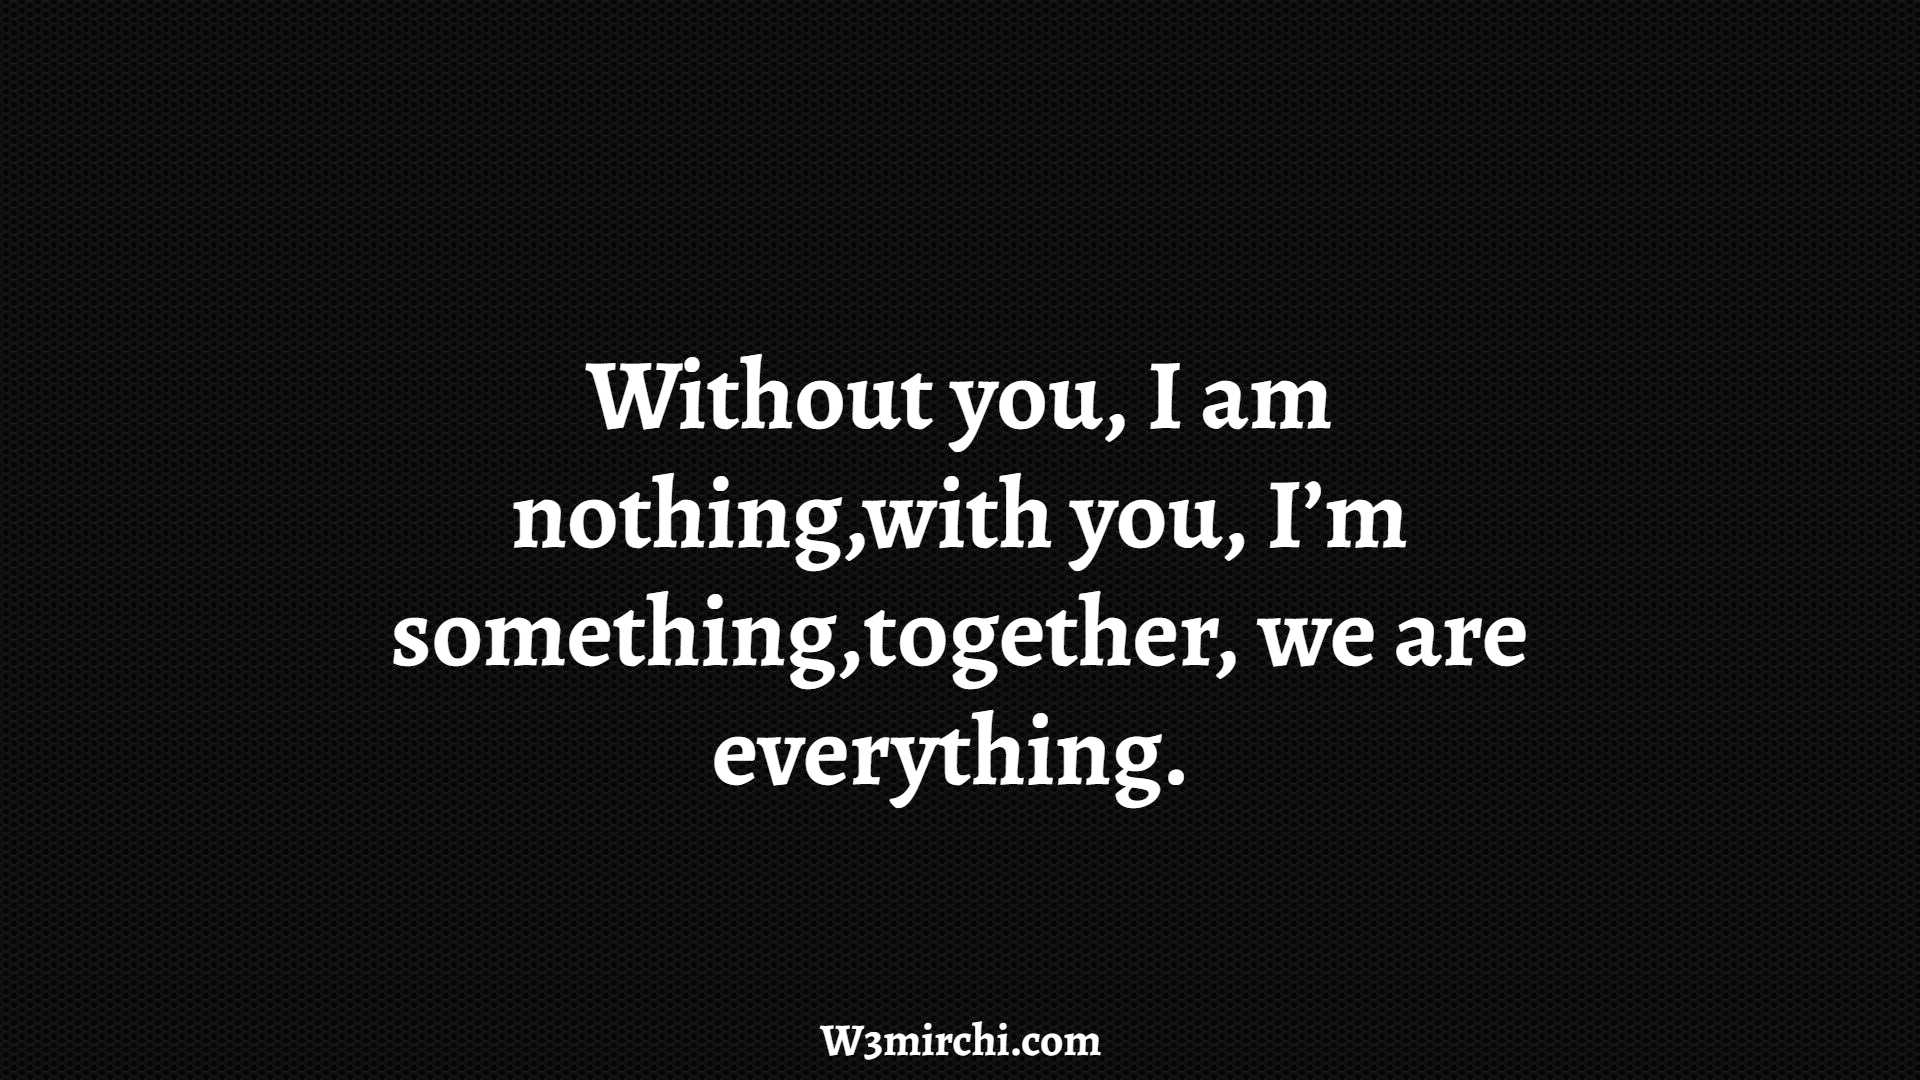 Without you, I am nothing, with you,